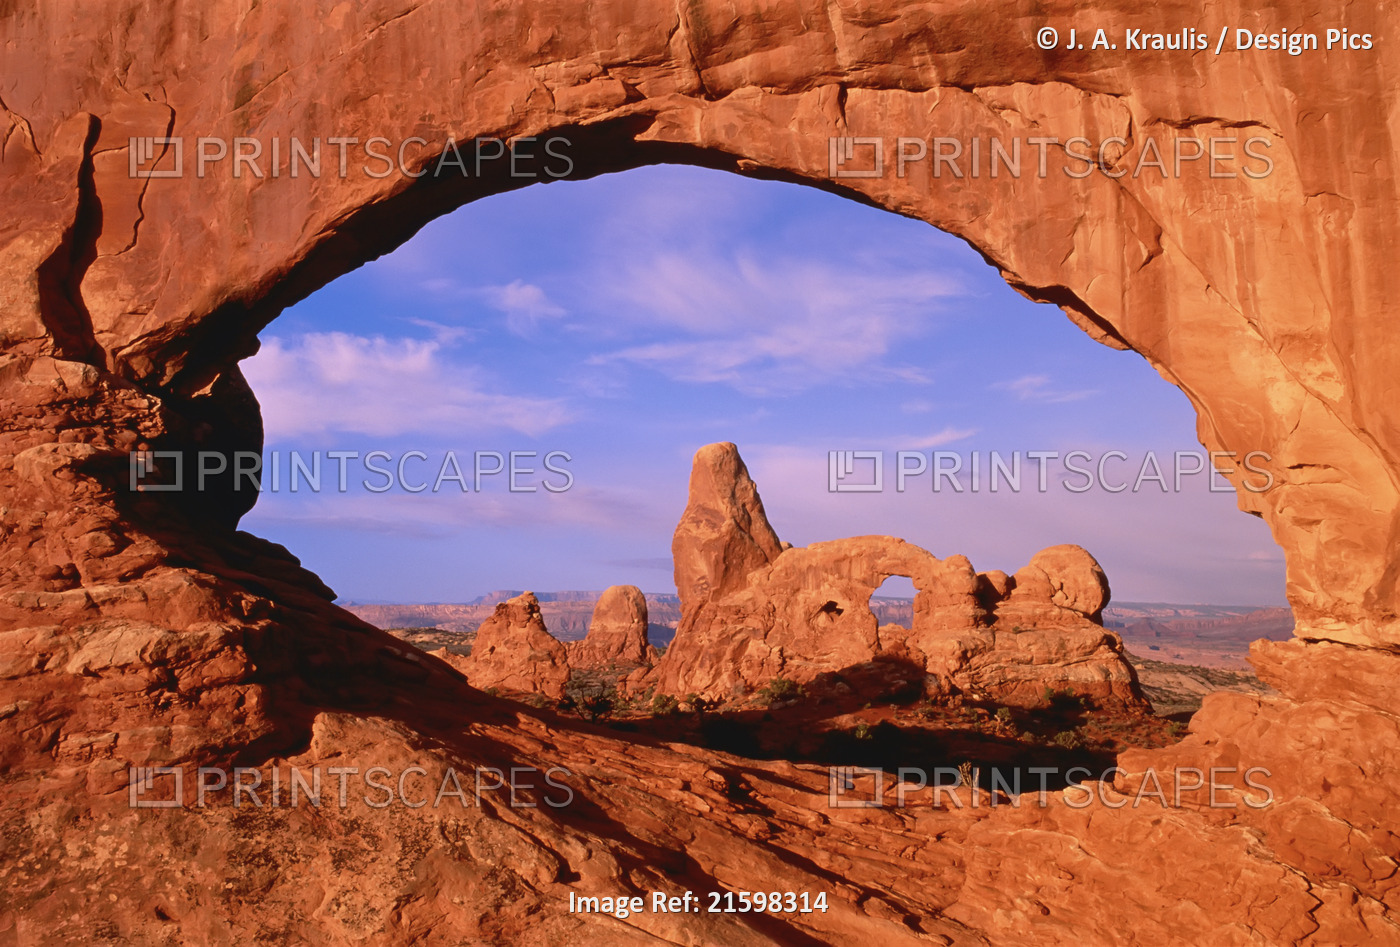 Turret Arch from North Window At Sunset Arches National Park, Utah, USA